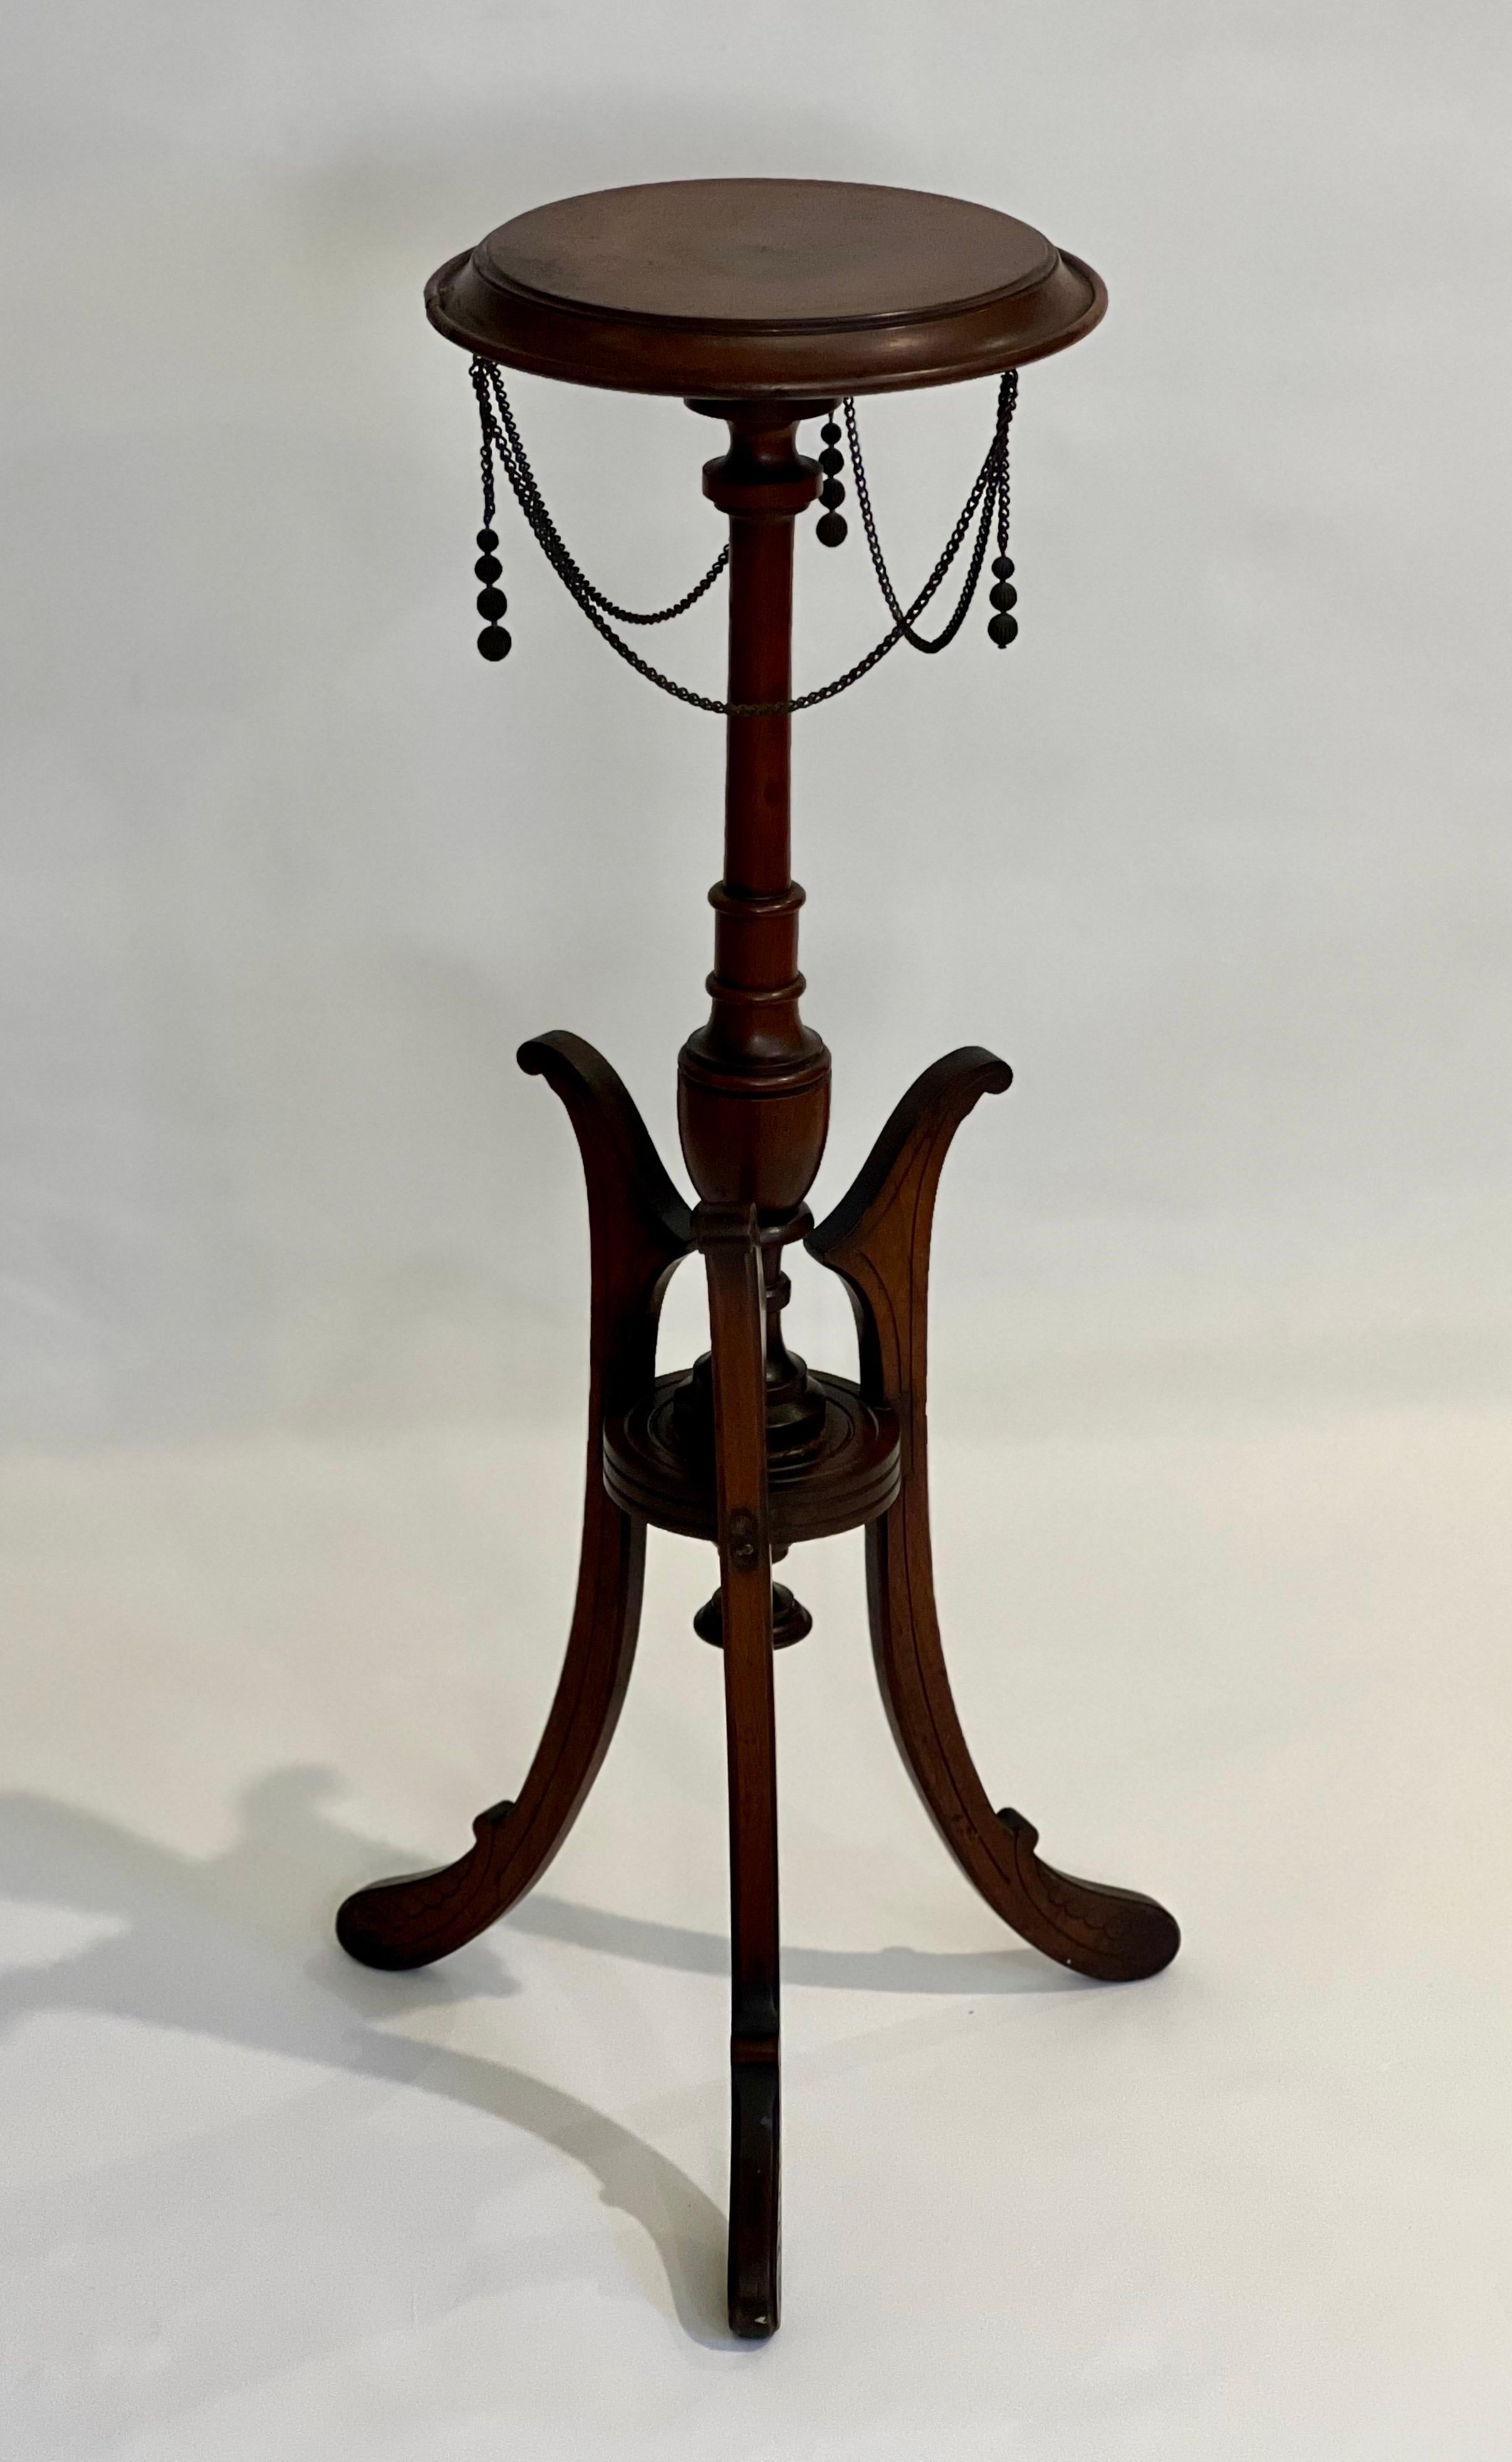 Antique Victorian mahogany pedestal plant stand, c. late 19th century.

Beautifully carved pedestal with a metal chain swag adorning the circular top. The tripod base has an incised design defining the curvature of the legs down to the rounded feet.